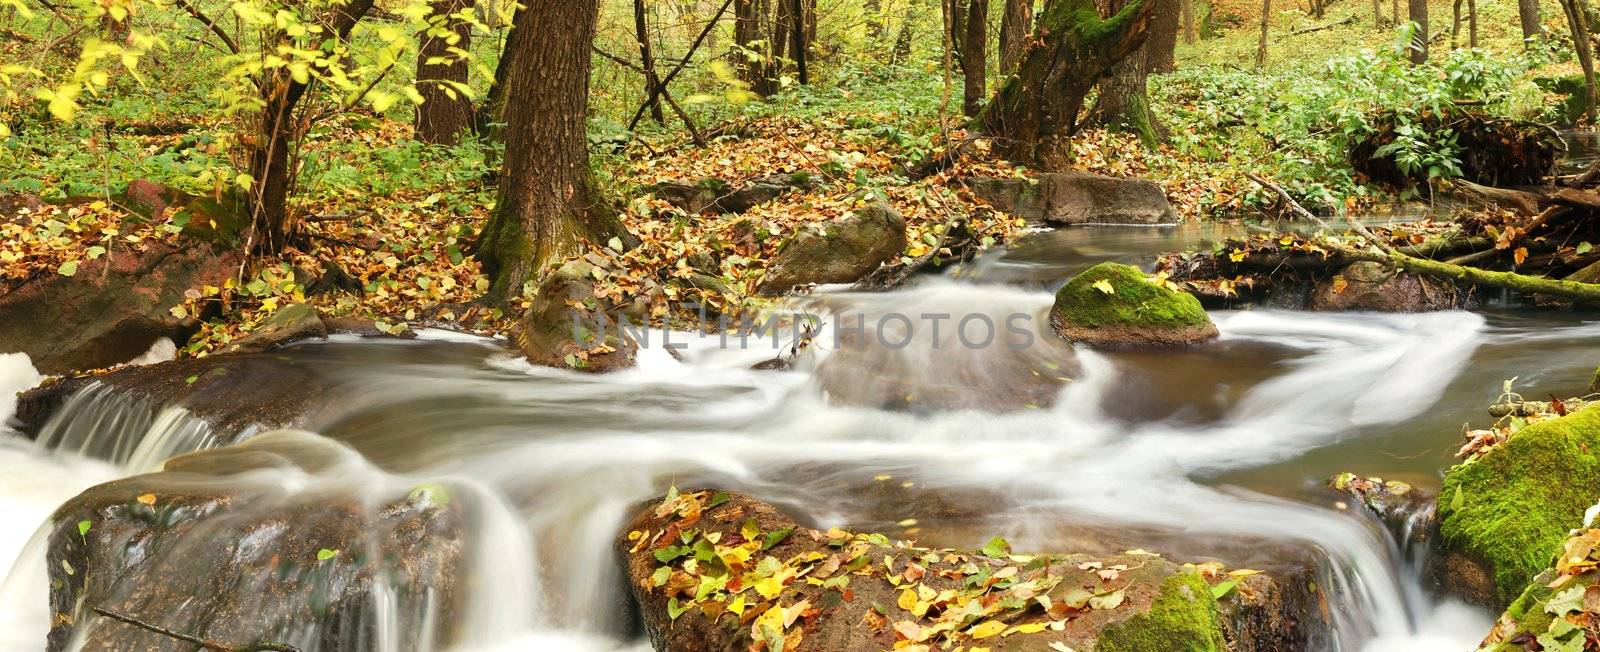 Waterfall in autumn forest by velkol